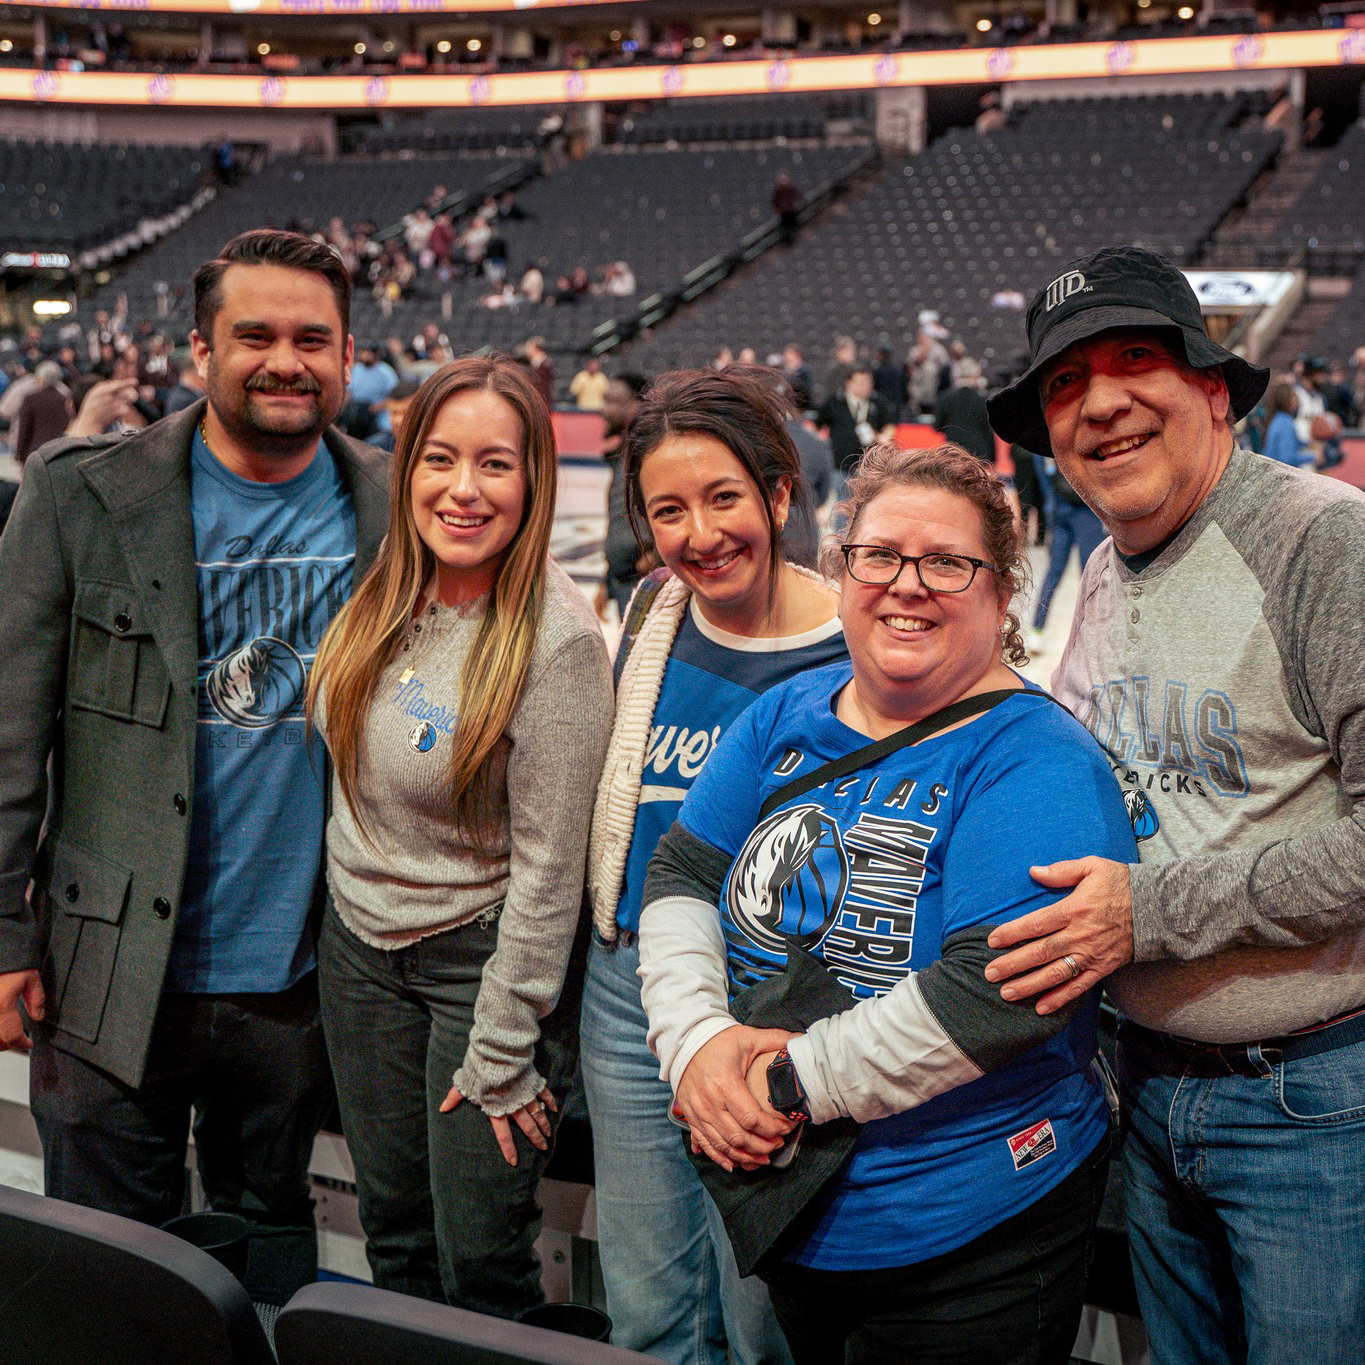 Photo Gallery: UT Dallas Night at the Dallas Mavericks. Group of people posing for a photo at a basketball court.